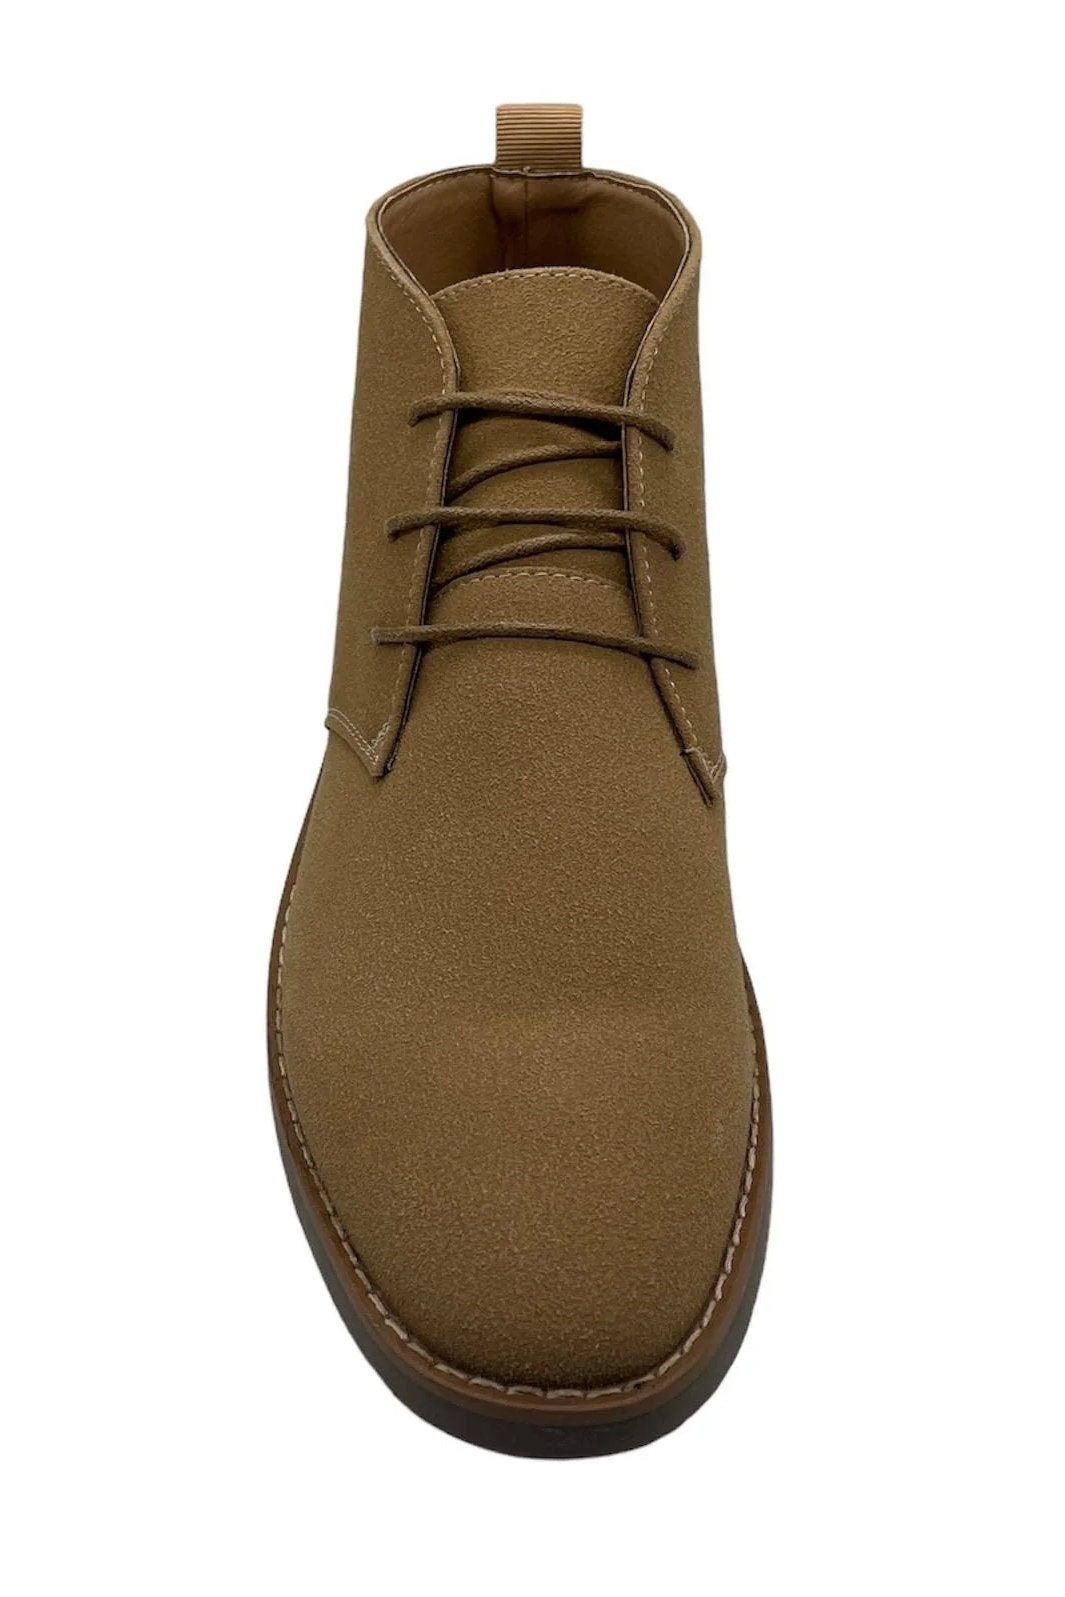 Gobi Sand Mens Boots-Front view